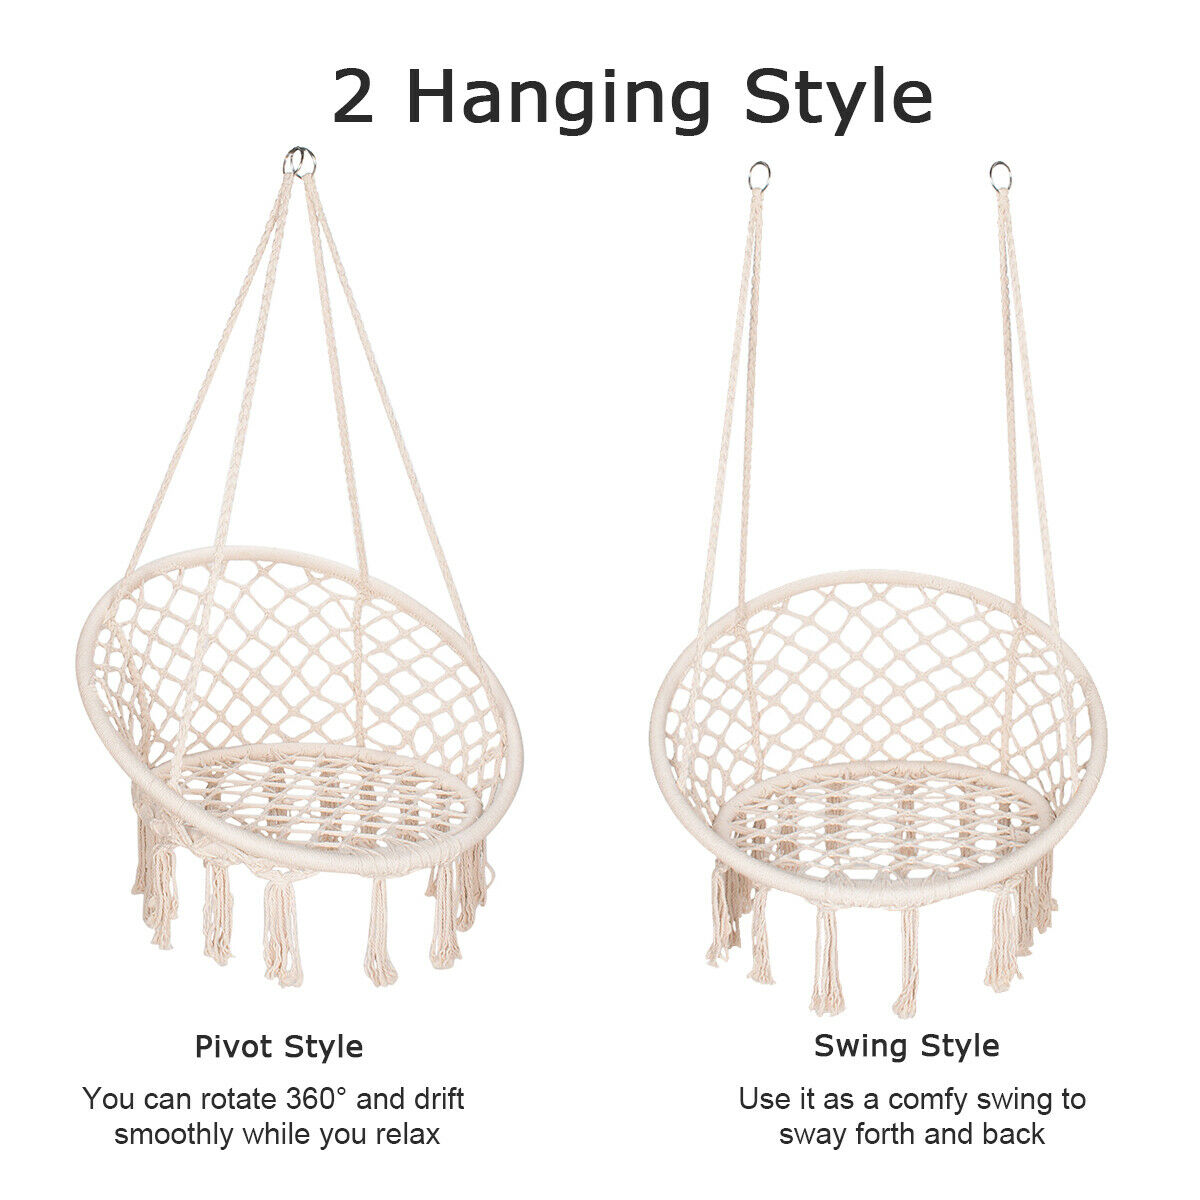 Outdoor Hanging Swing Cotton Hammock Chair Solid Mesh Woven Rope Yard Patio Porch Garden Wooden Bar Chair Swing Patio Chair With Install Tool Home Decor Gift - image 2 of 8